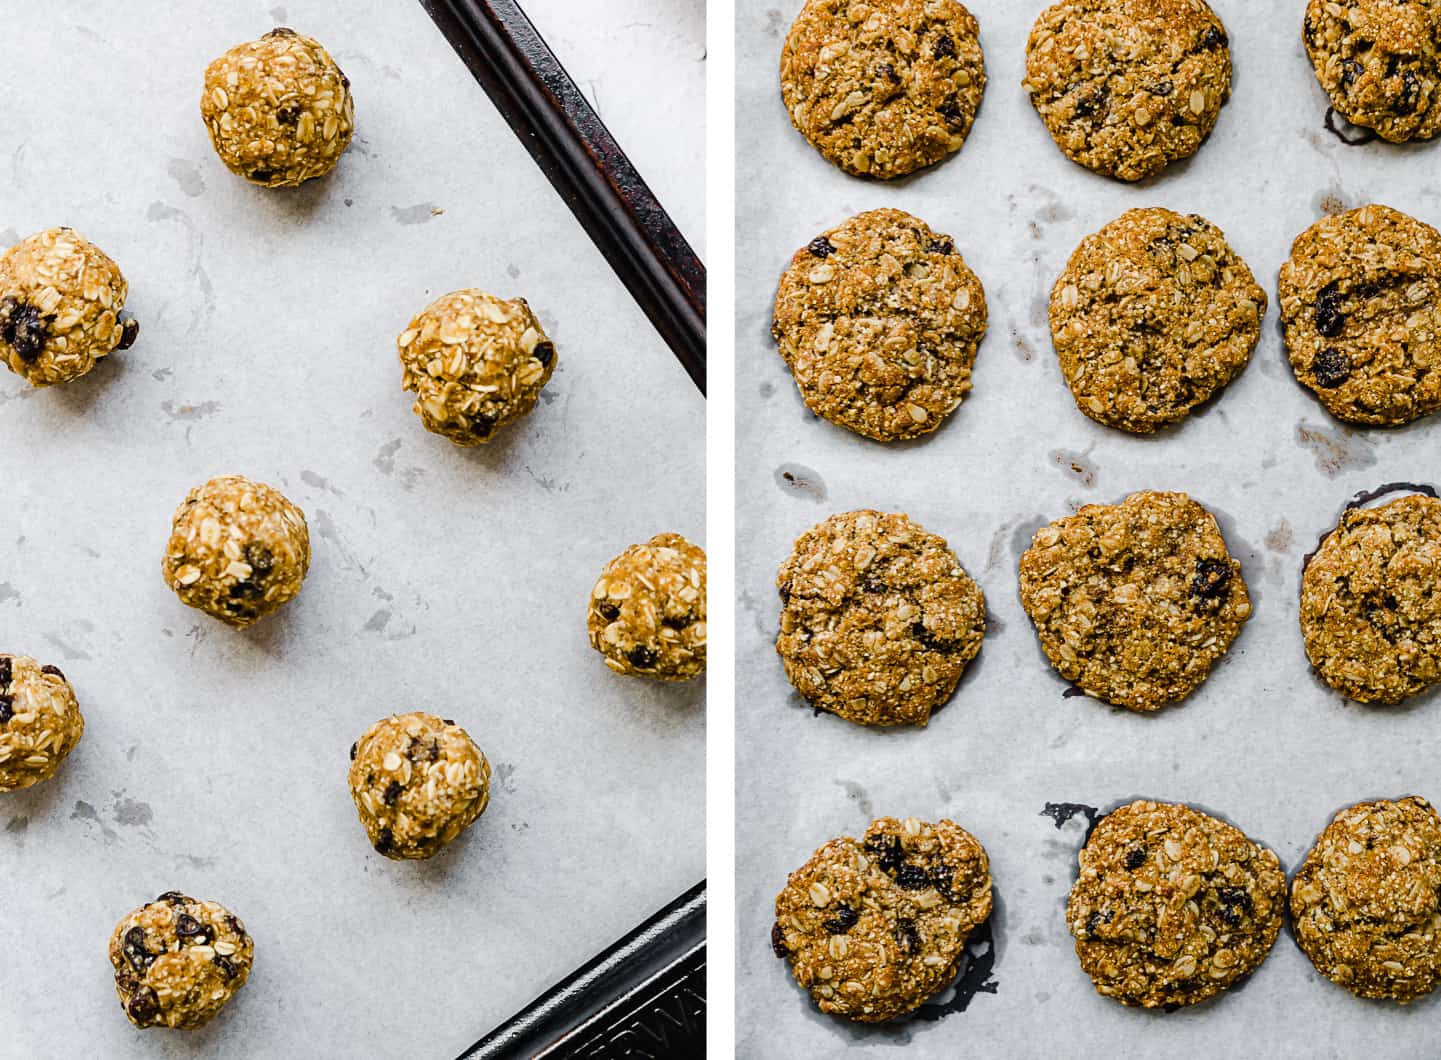 oatmeal raisin cookies being prepped on a baking sheet with parchment paper